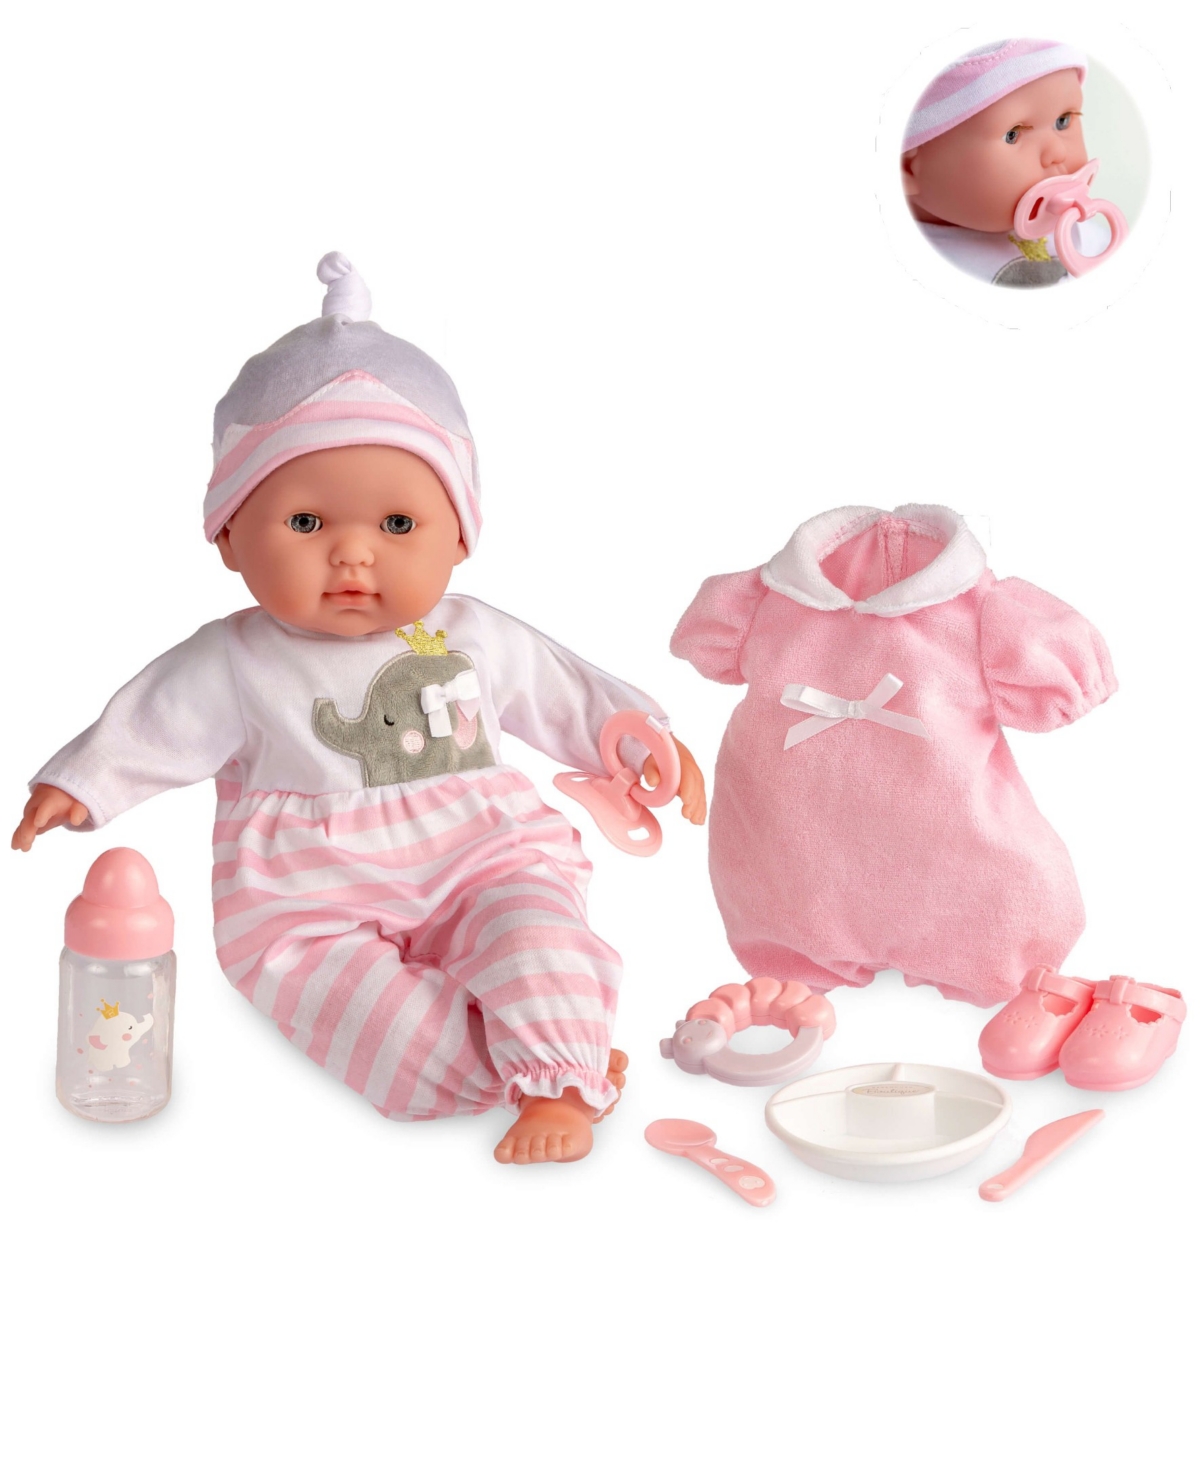 Jc Toys Berenguer Boutique 15" Soft Body Baby Doll Pink Outfit In Pink Gift Set